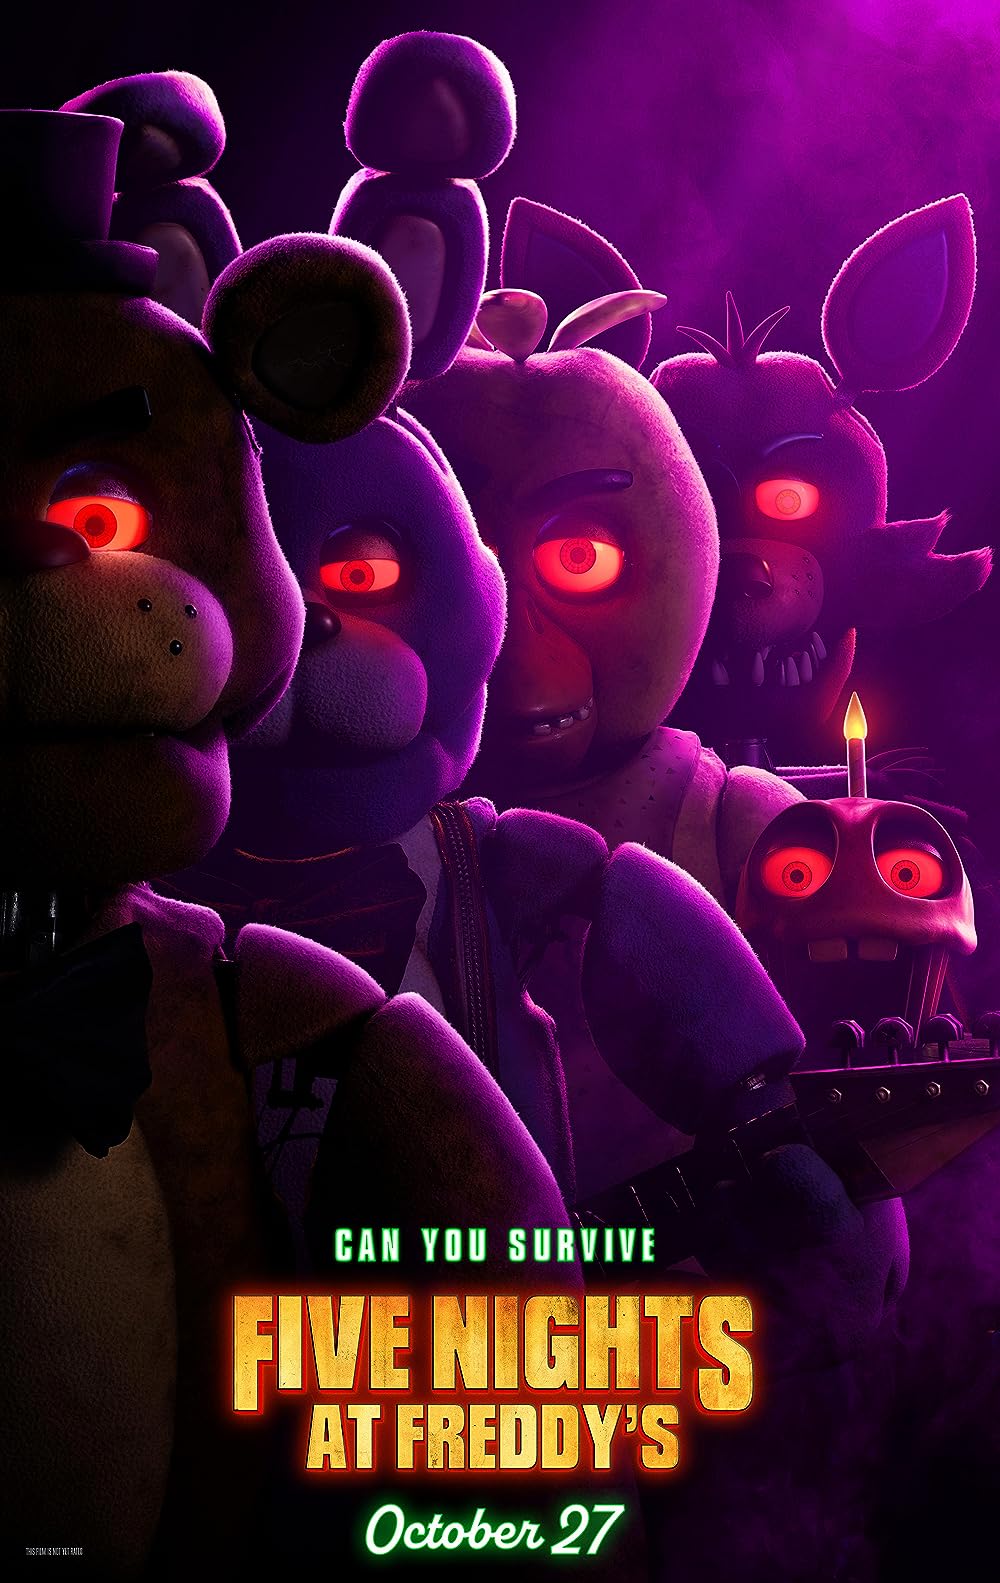 Five Nights at Freddys movie poster